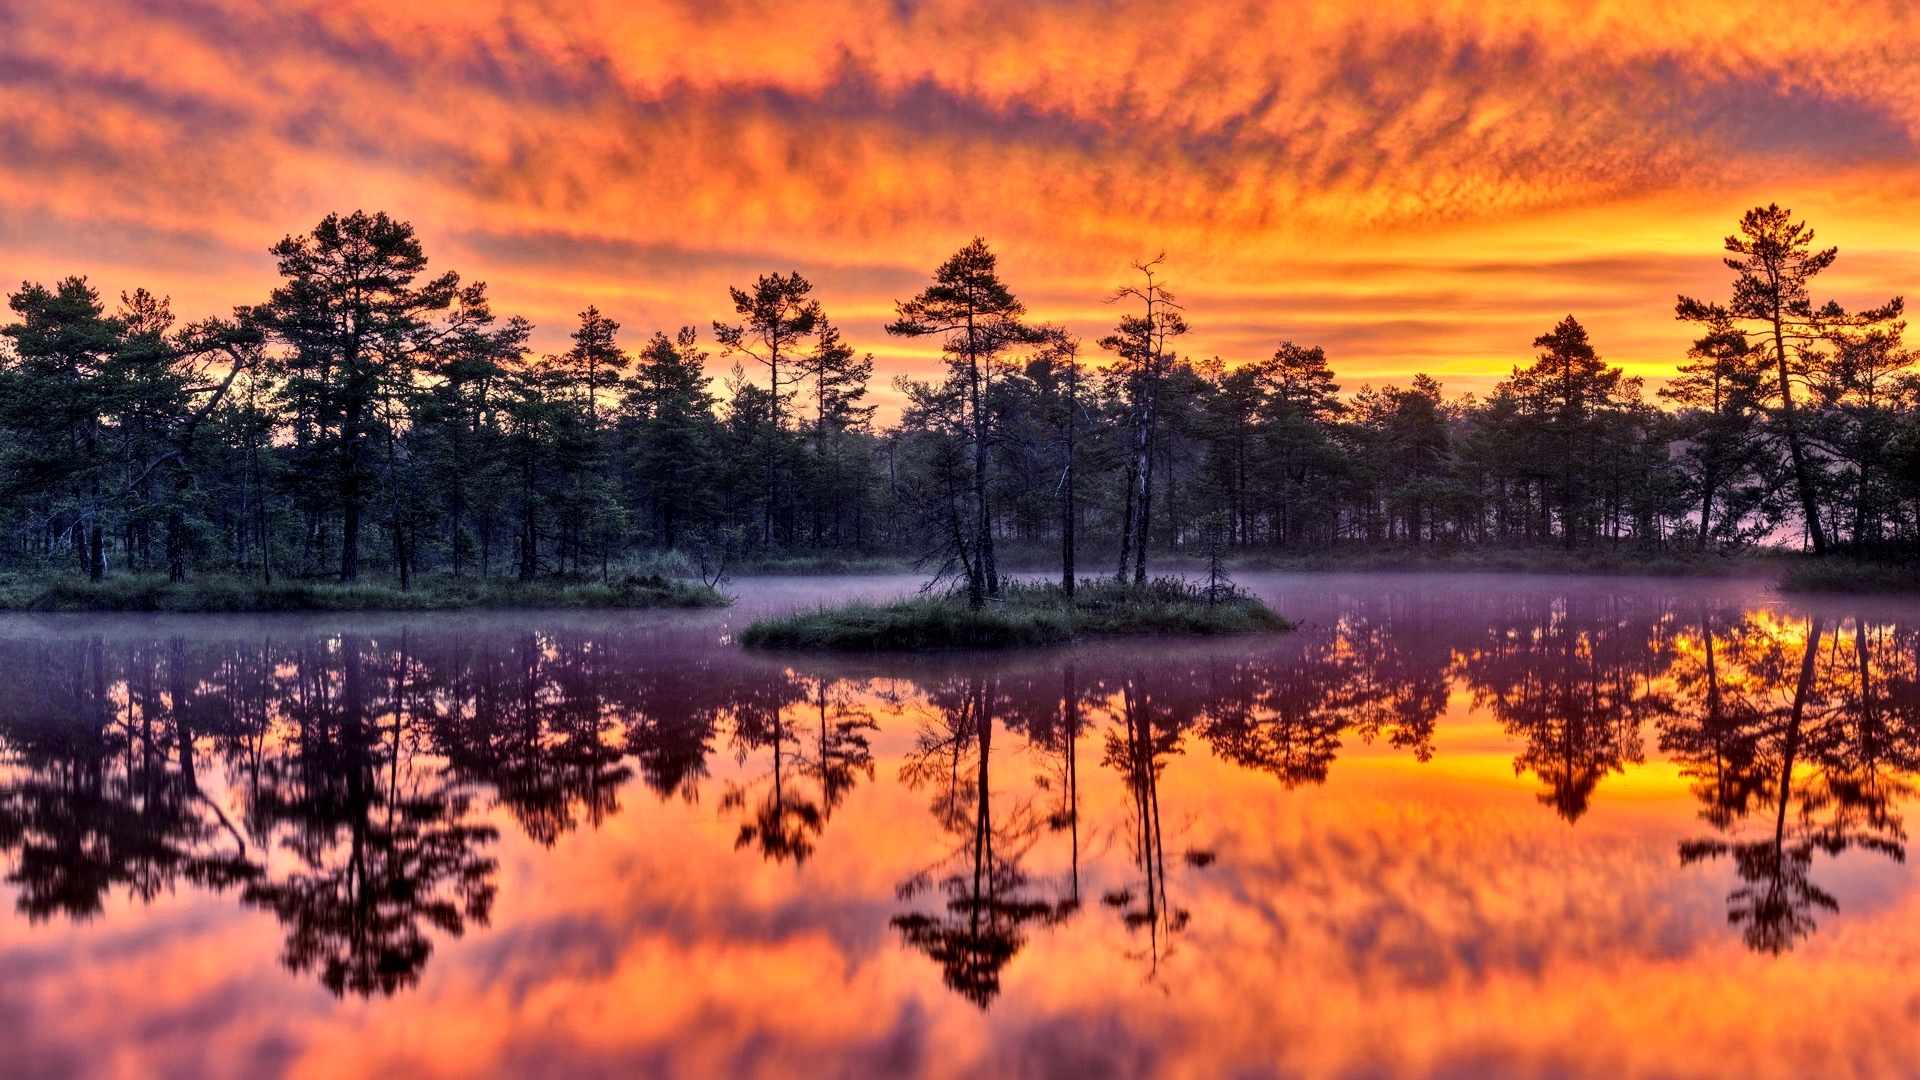 General 1920x1080 nature sunset reflection trees clouds lake